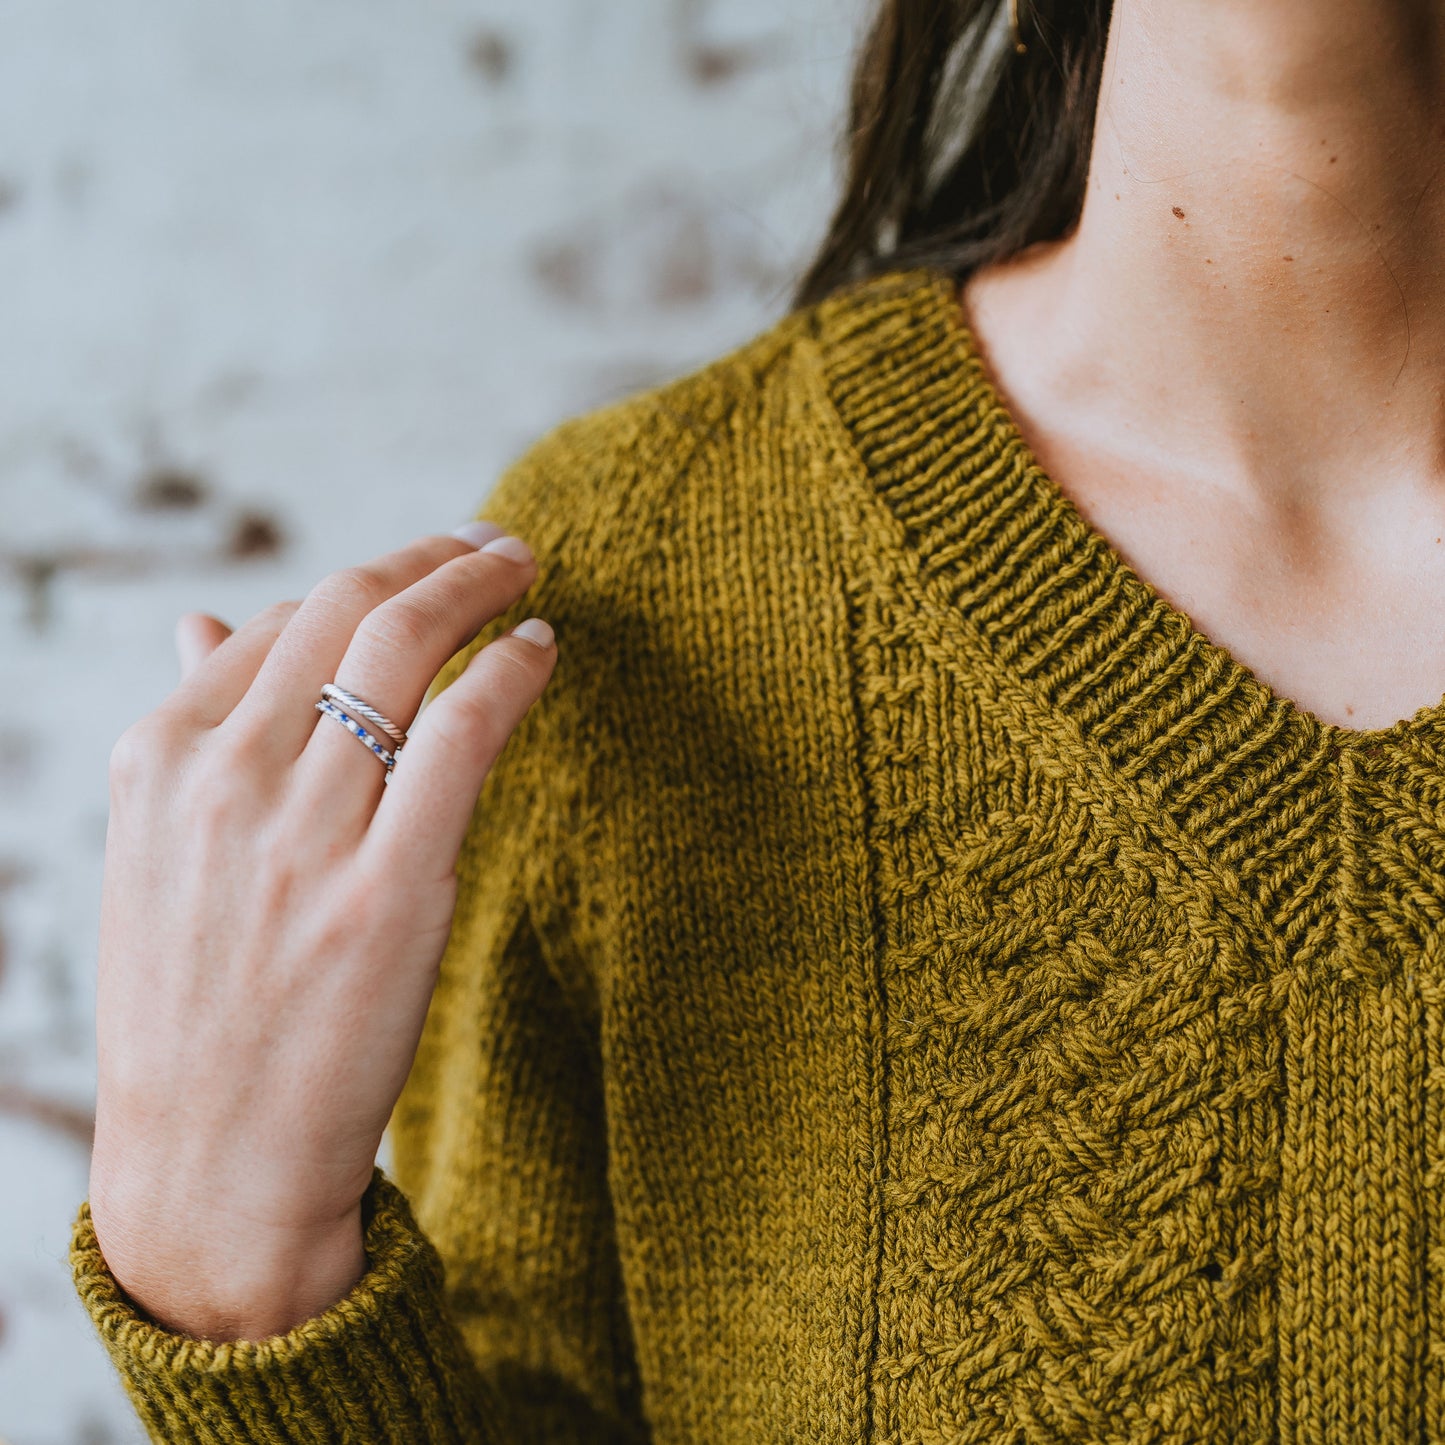 Seen from up close, the camera focuses on the cabled details of the knit sweater Laura is wearing. The yarn is a golden color.